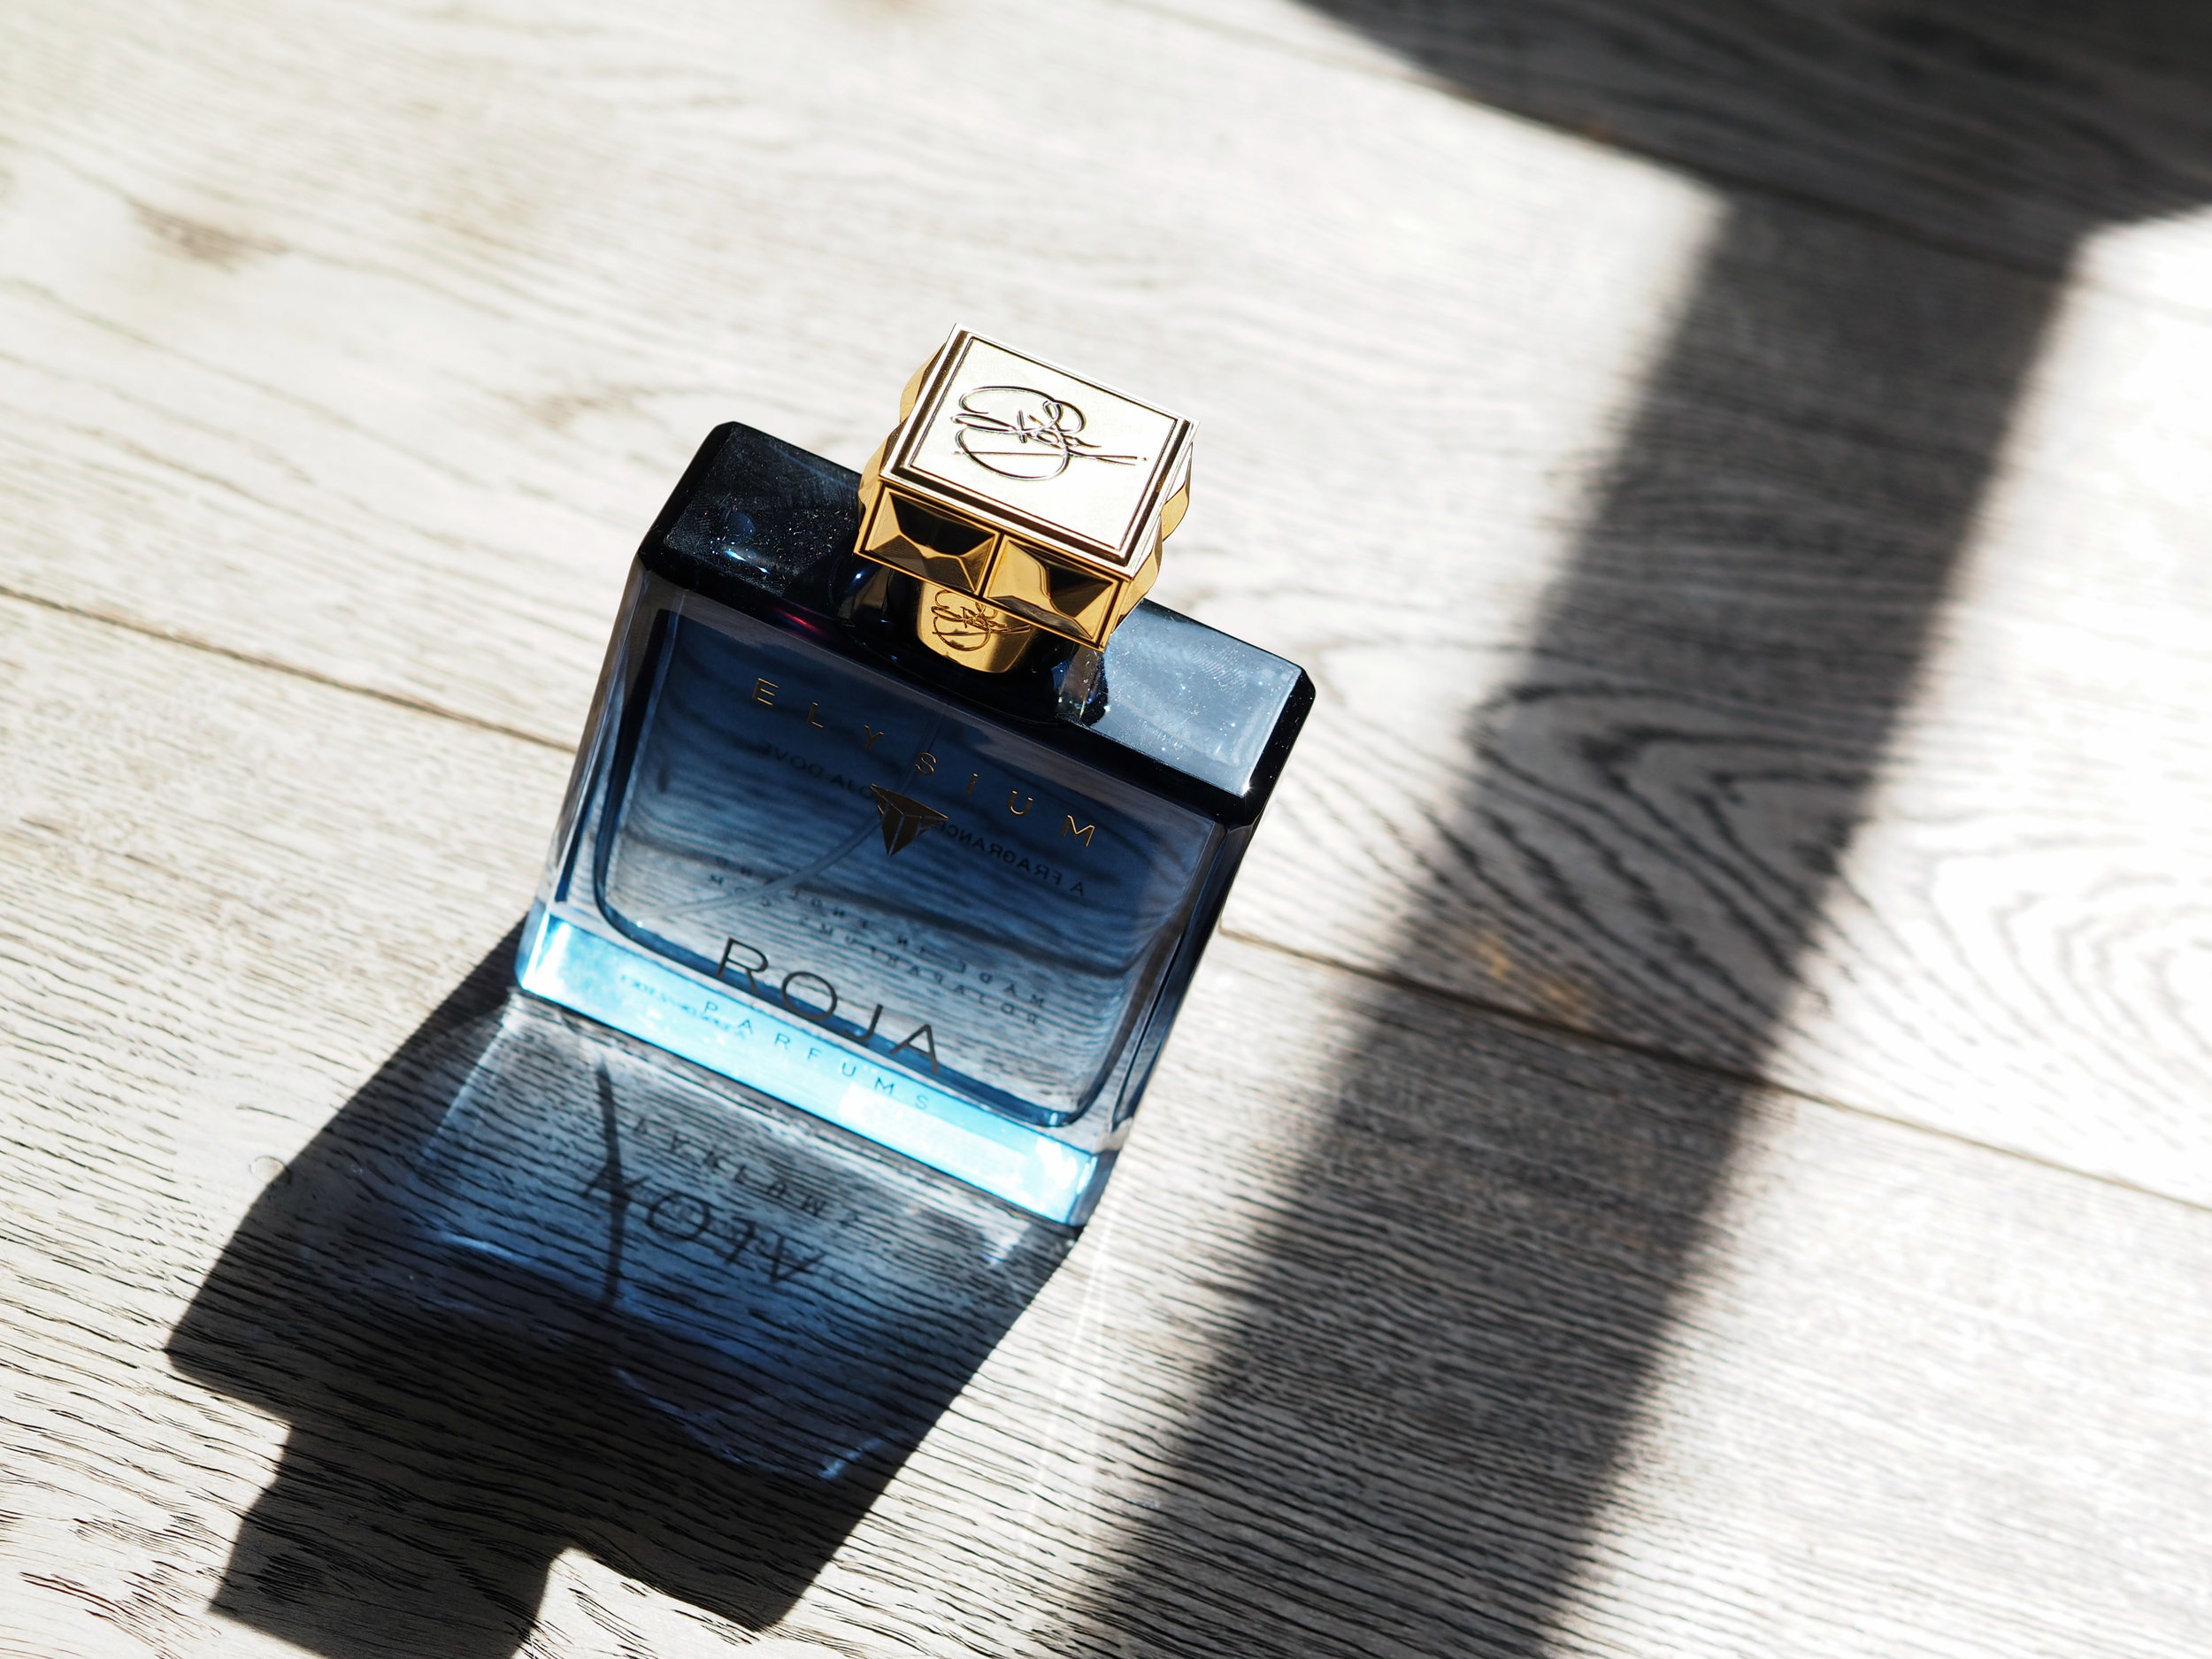 Introducing this huge new men’s fragrance from Roja Parfums: Elysium